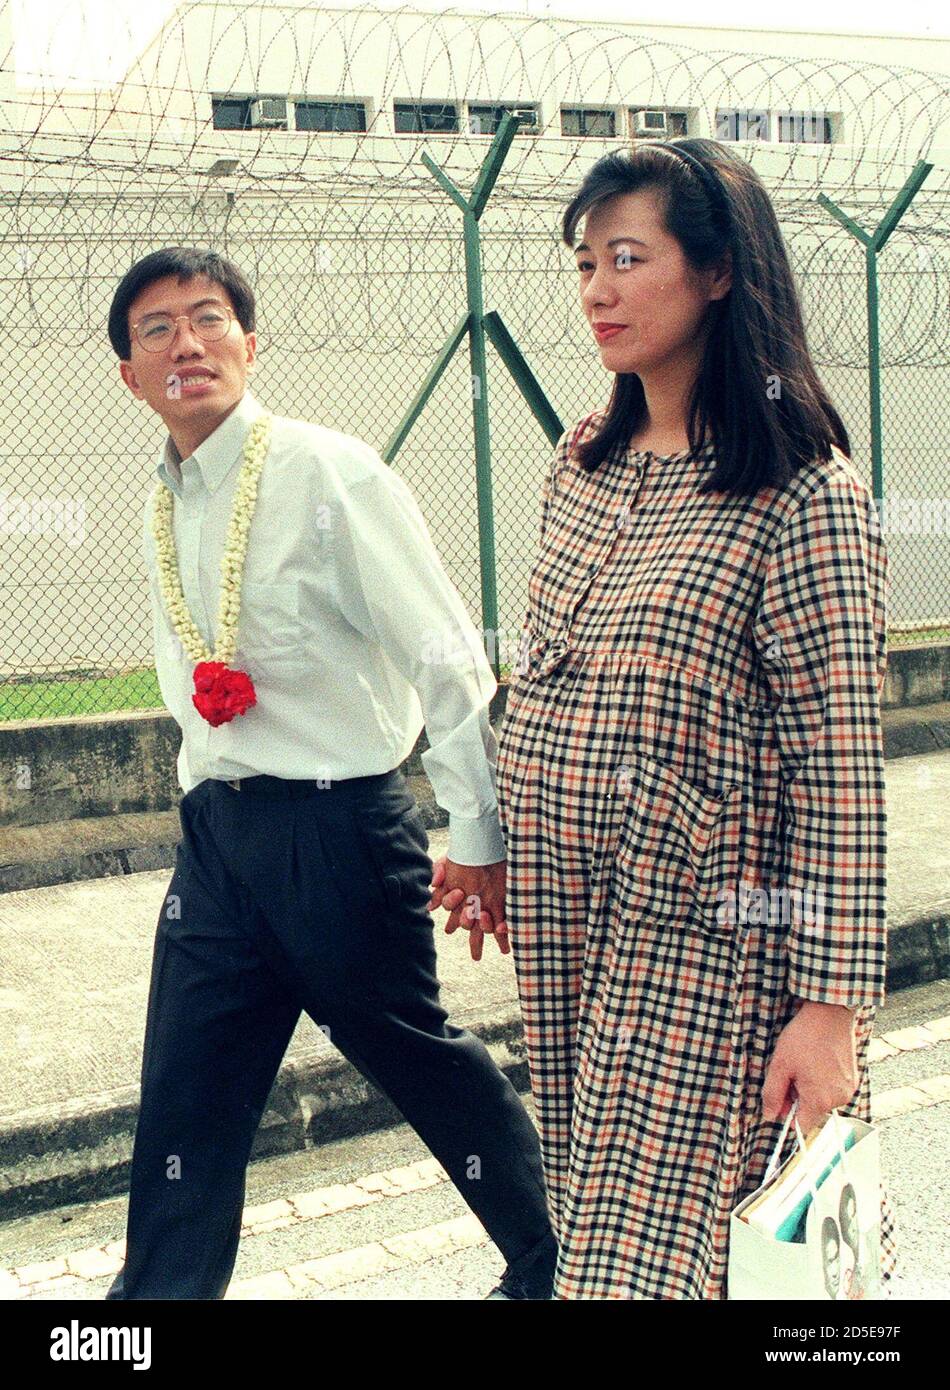 singapore-opposition-politican-chee-soon-juan-l-leaves-the-queenstown-remand-prison-february-8-with-his-pregnant-wife-huang-chih-mei-after-the-former-had-spent-a-week-in-jail-for-violating-a-law-against-speaking-in-public-without-a-permit-chee-who-leads-the-singapore-democratic-party-sdp-vowed-on-monday-to-continue-his-campaign-for-greater-free-speech-stdljdp-2D5E97F.jpg